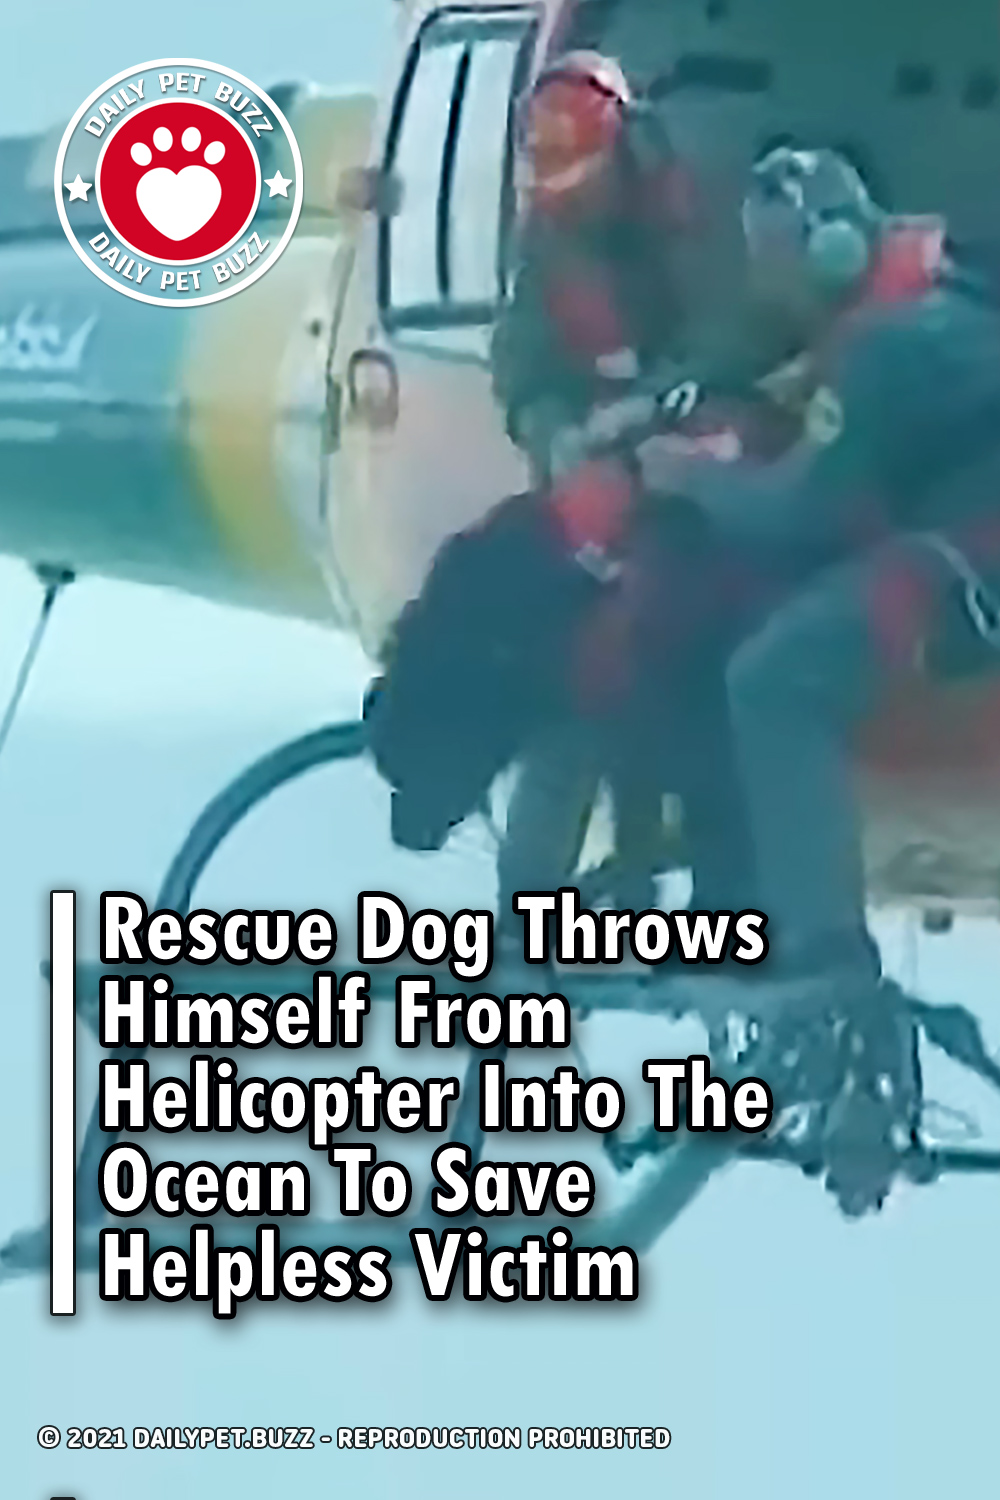 Rescue Dog Throws Himself From Helicopter Into The Ocean To Save Helpless Victim